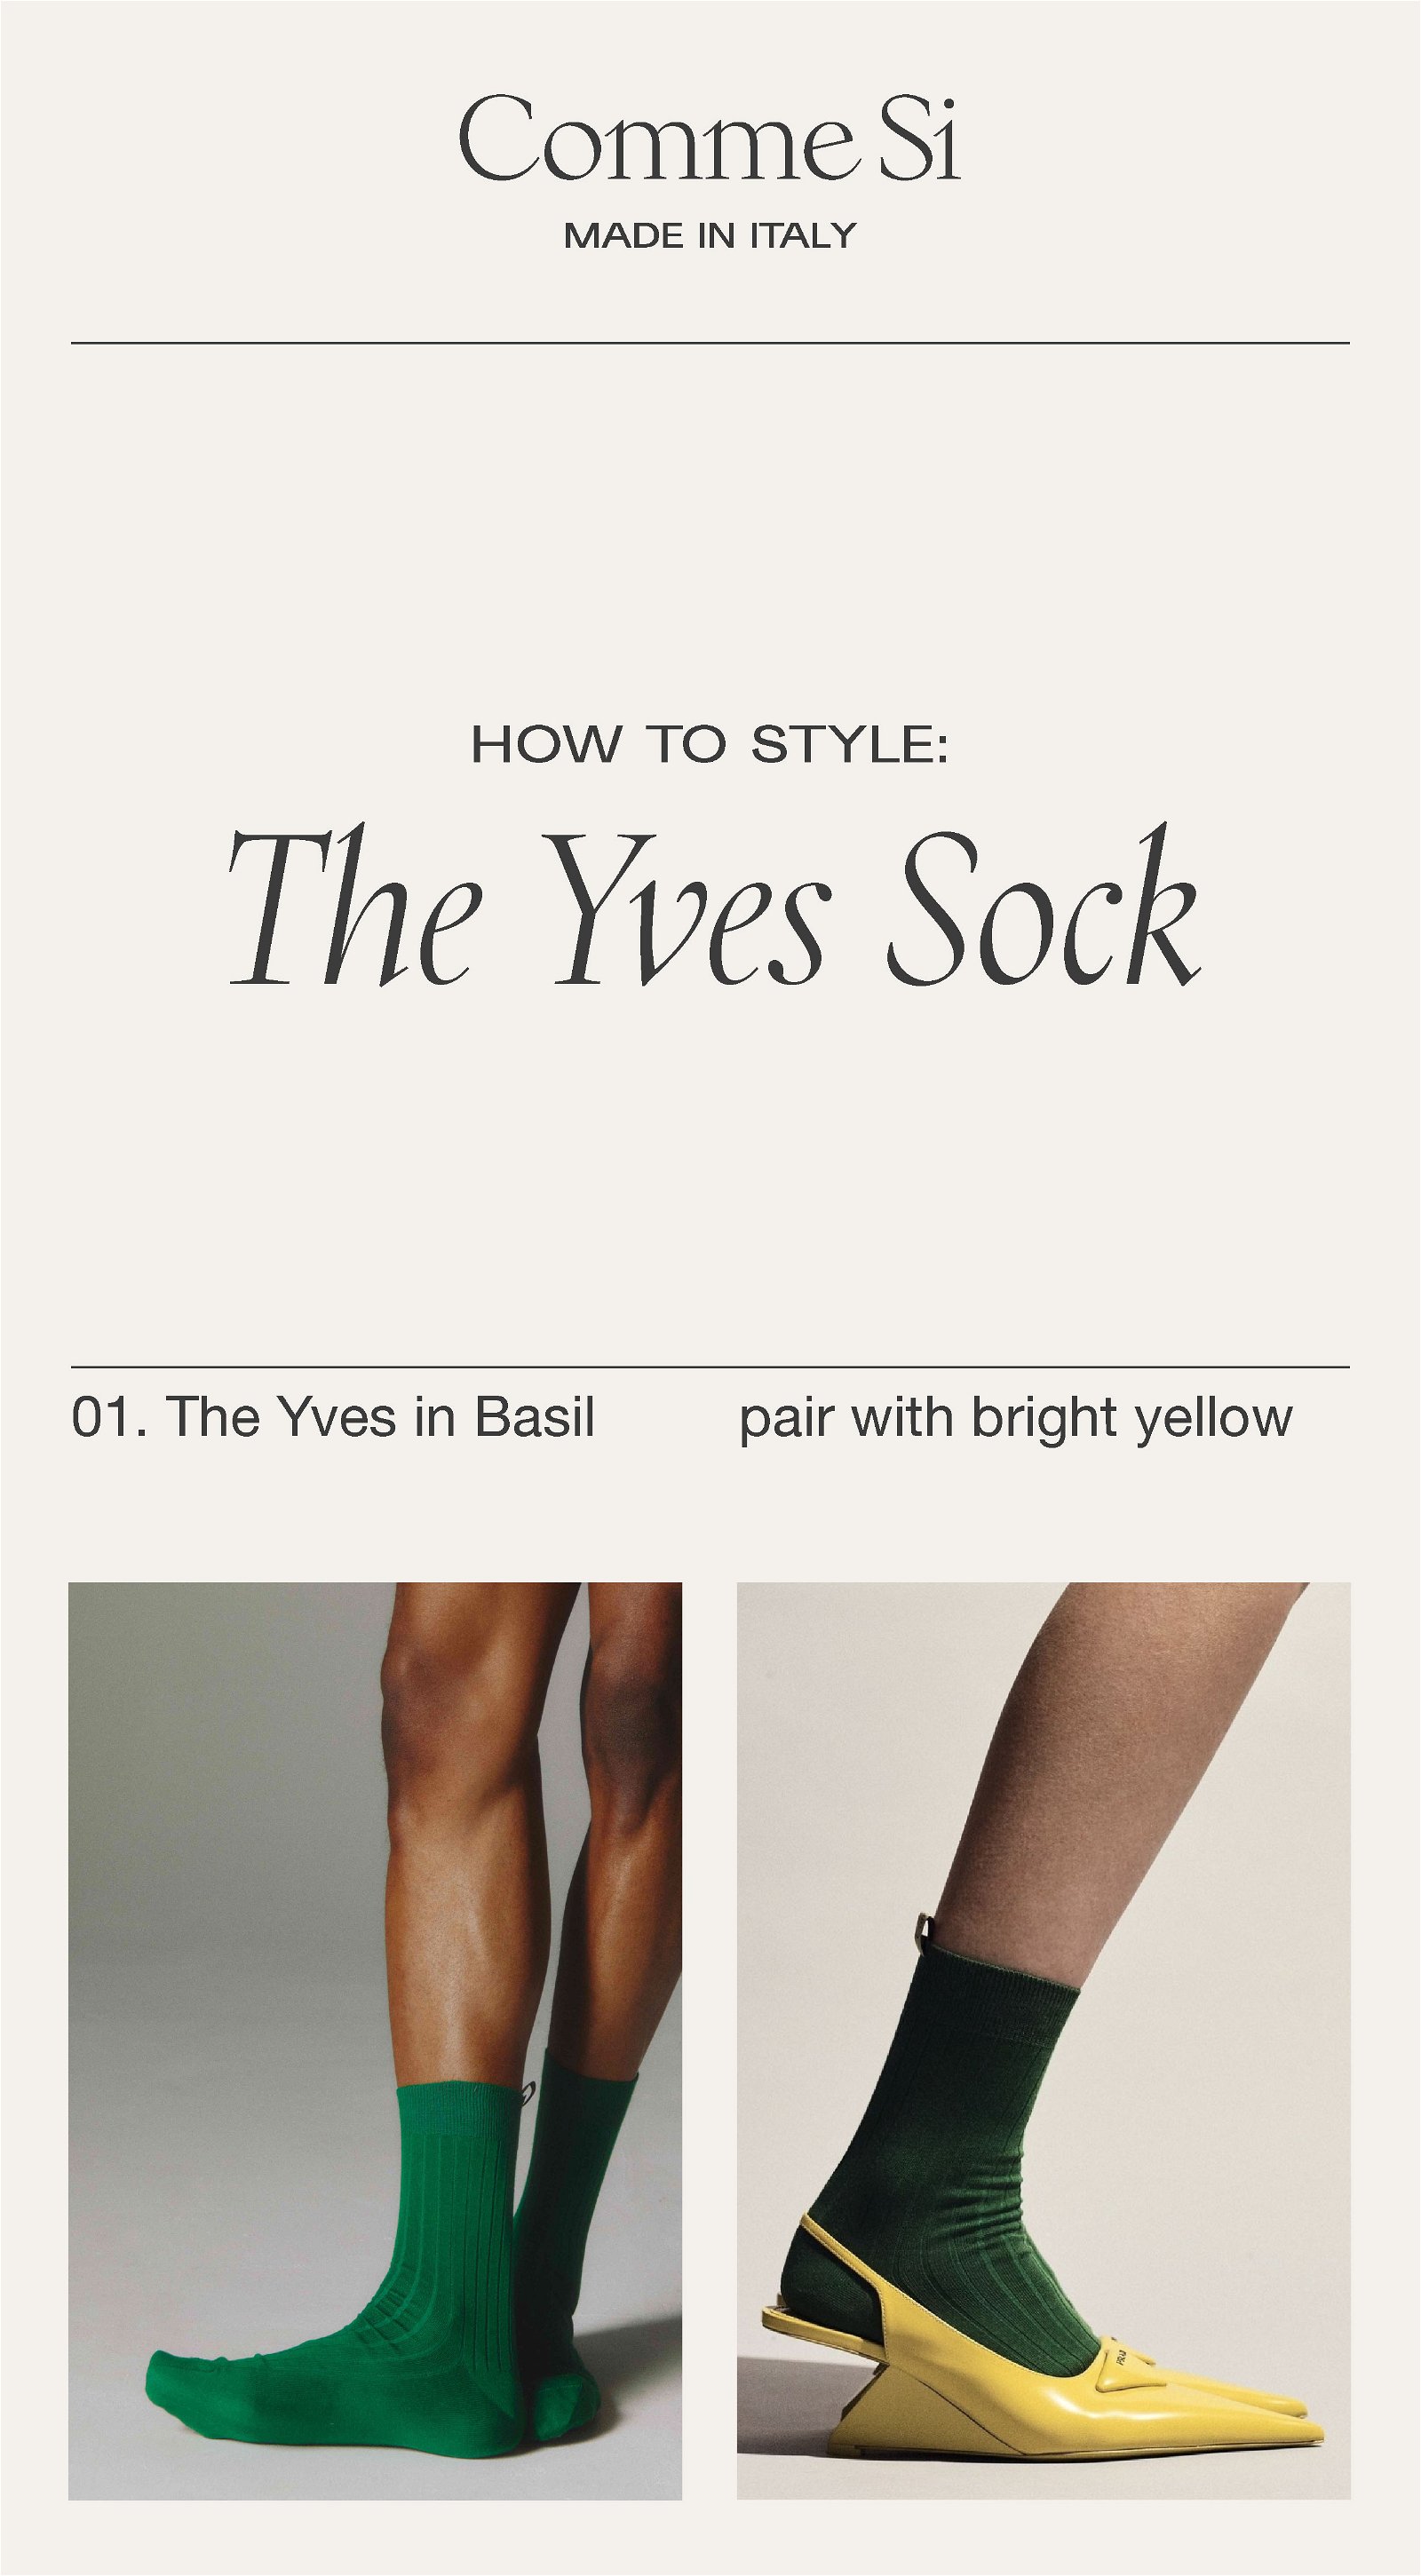 How to Style: The Yves Sock. 01. The Yves in Basil. Pair with bright yellow